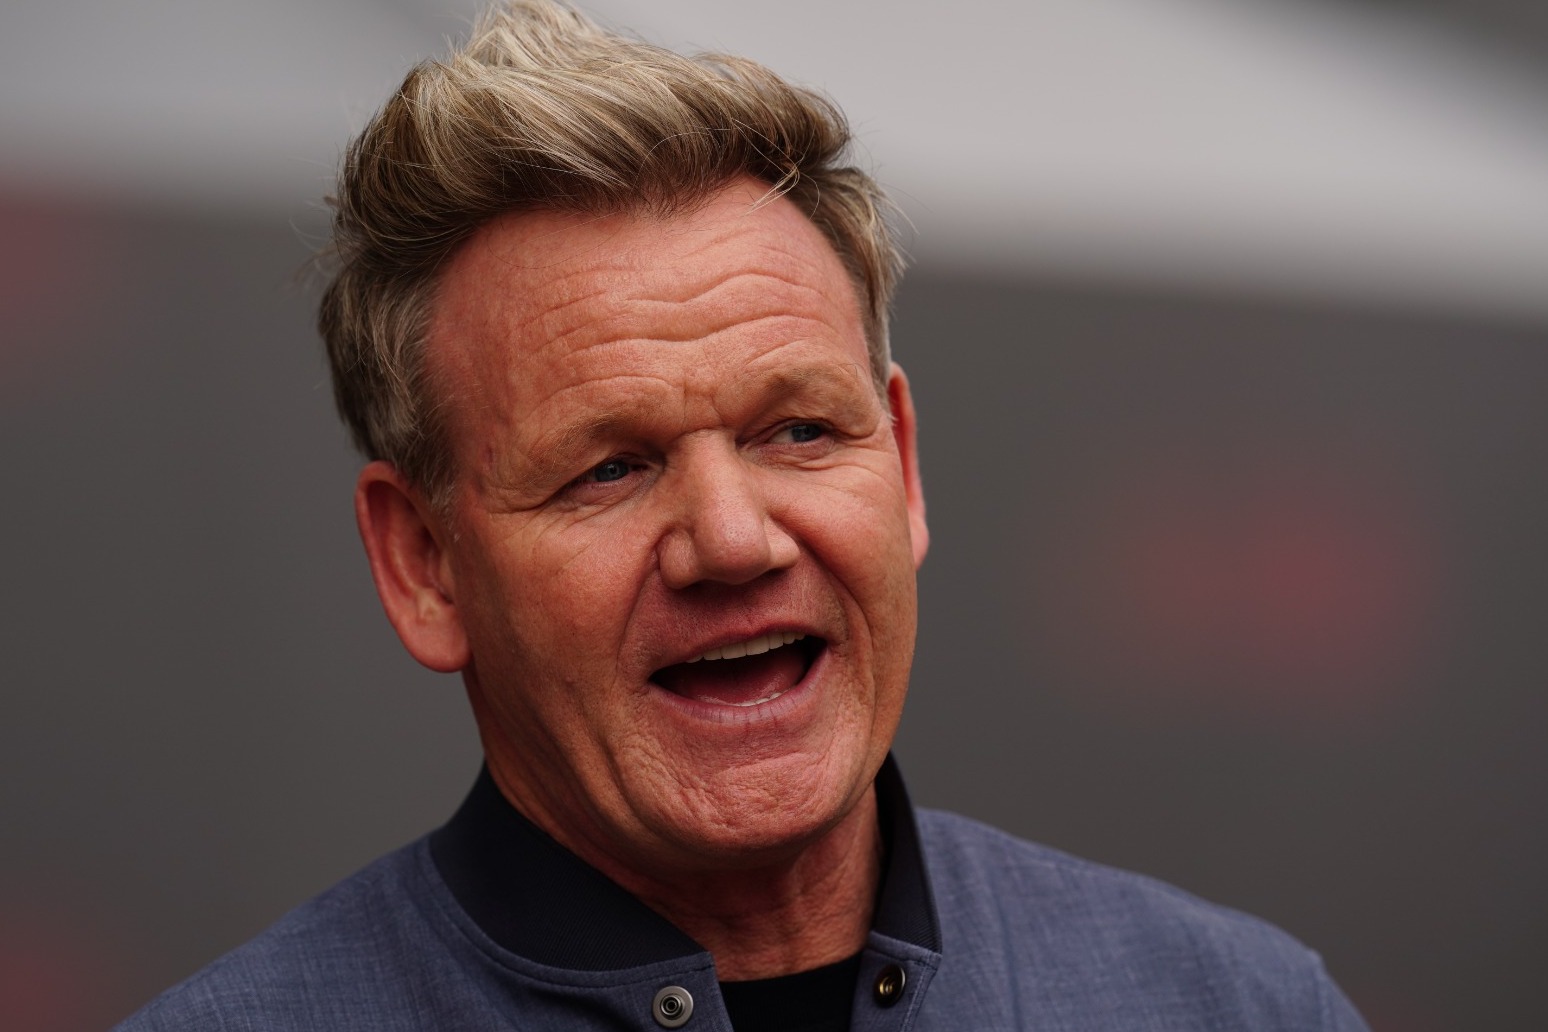 Adverts for Gordon Ramsay’s gin banned over honeyberry claims 